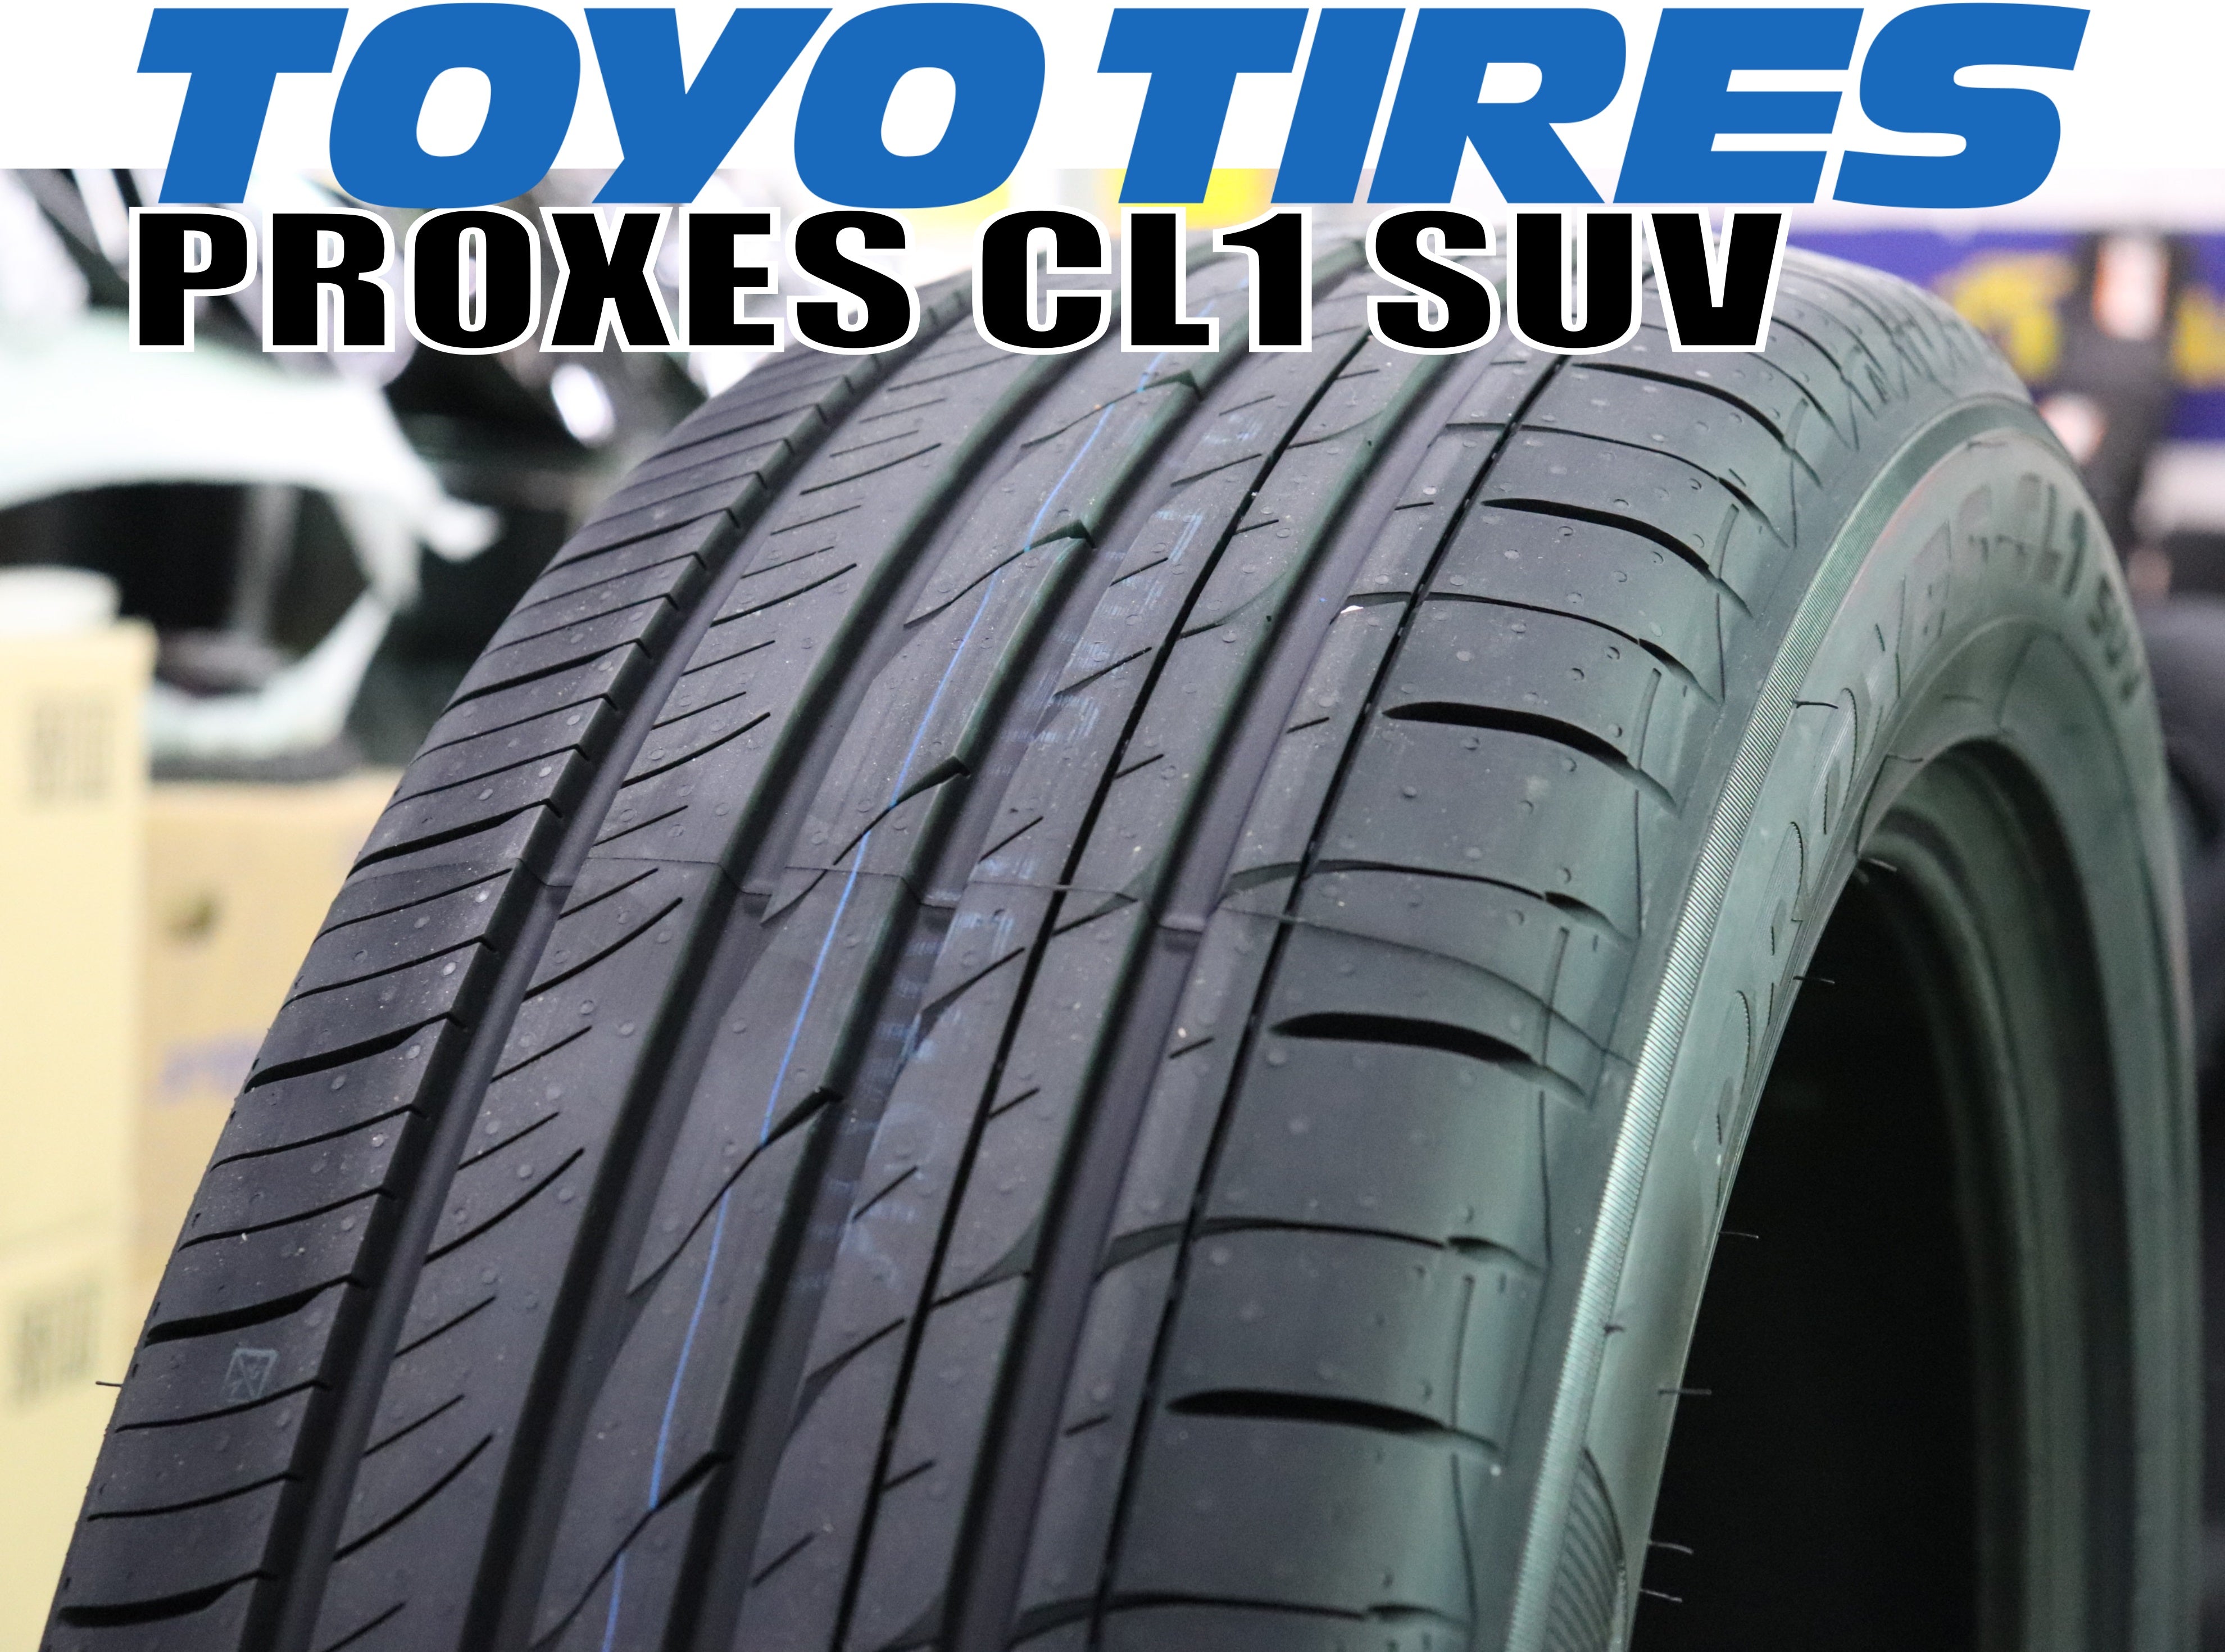 TOYO TIRES PROXES CL1SUV（トーヨー プロクセス） 225/60R17 99H 225/60-17 – ハマガレネットストア